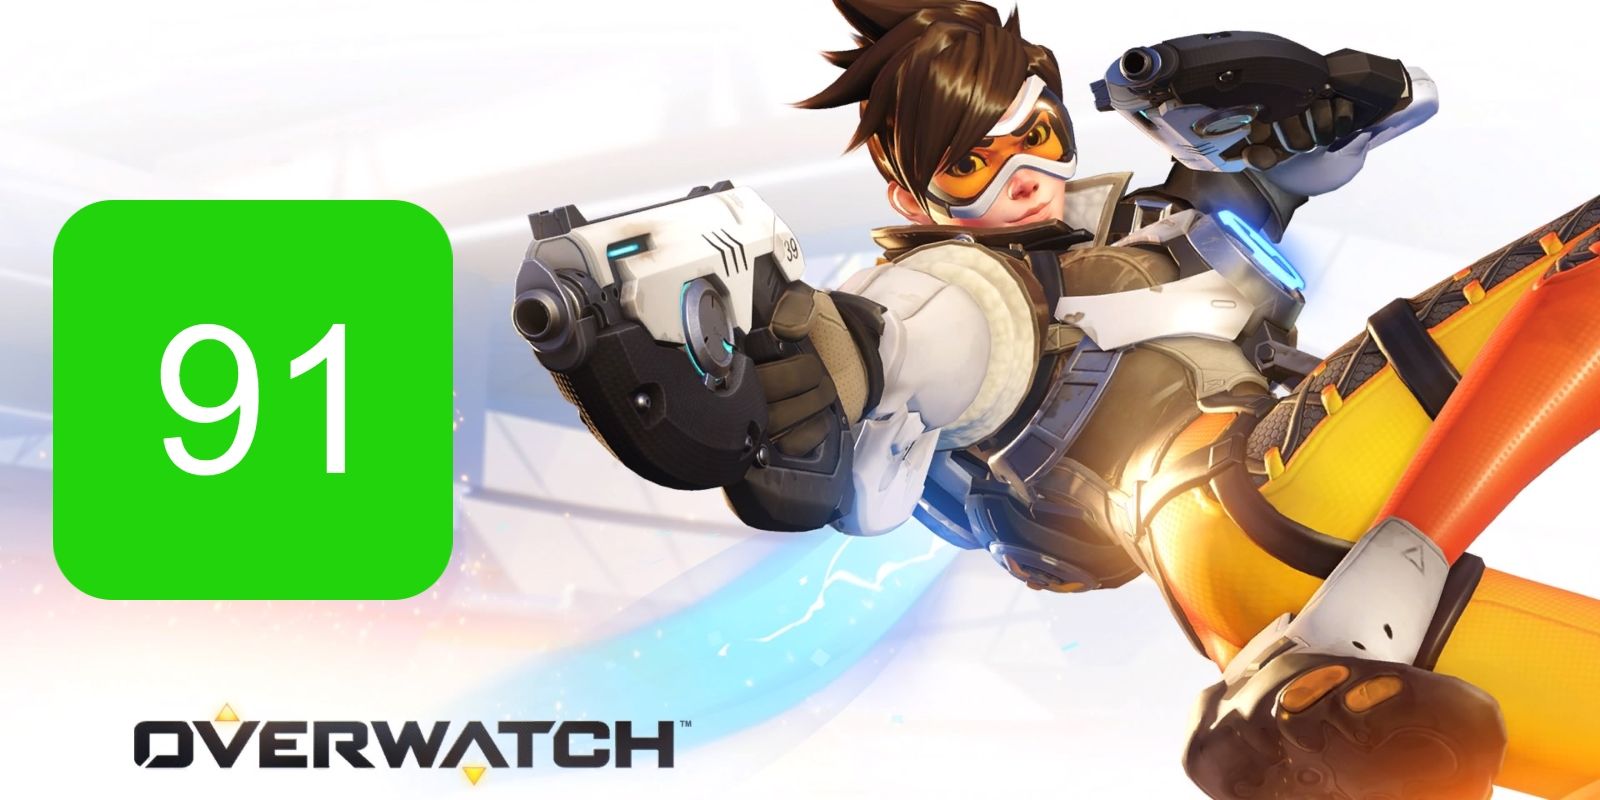 The Overwatch Metascore for PC featuring Tracer